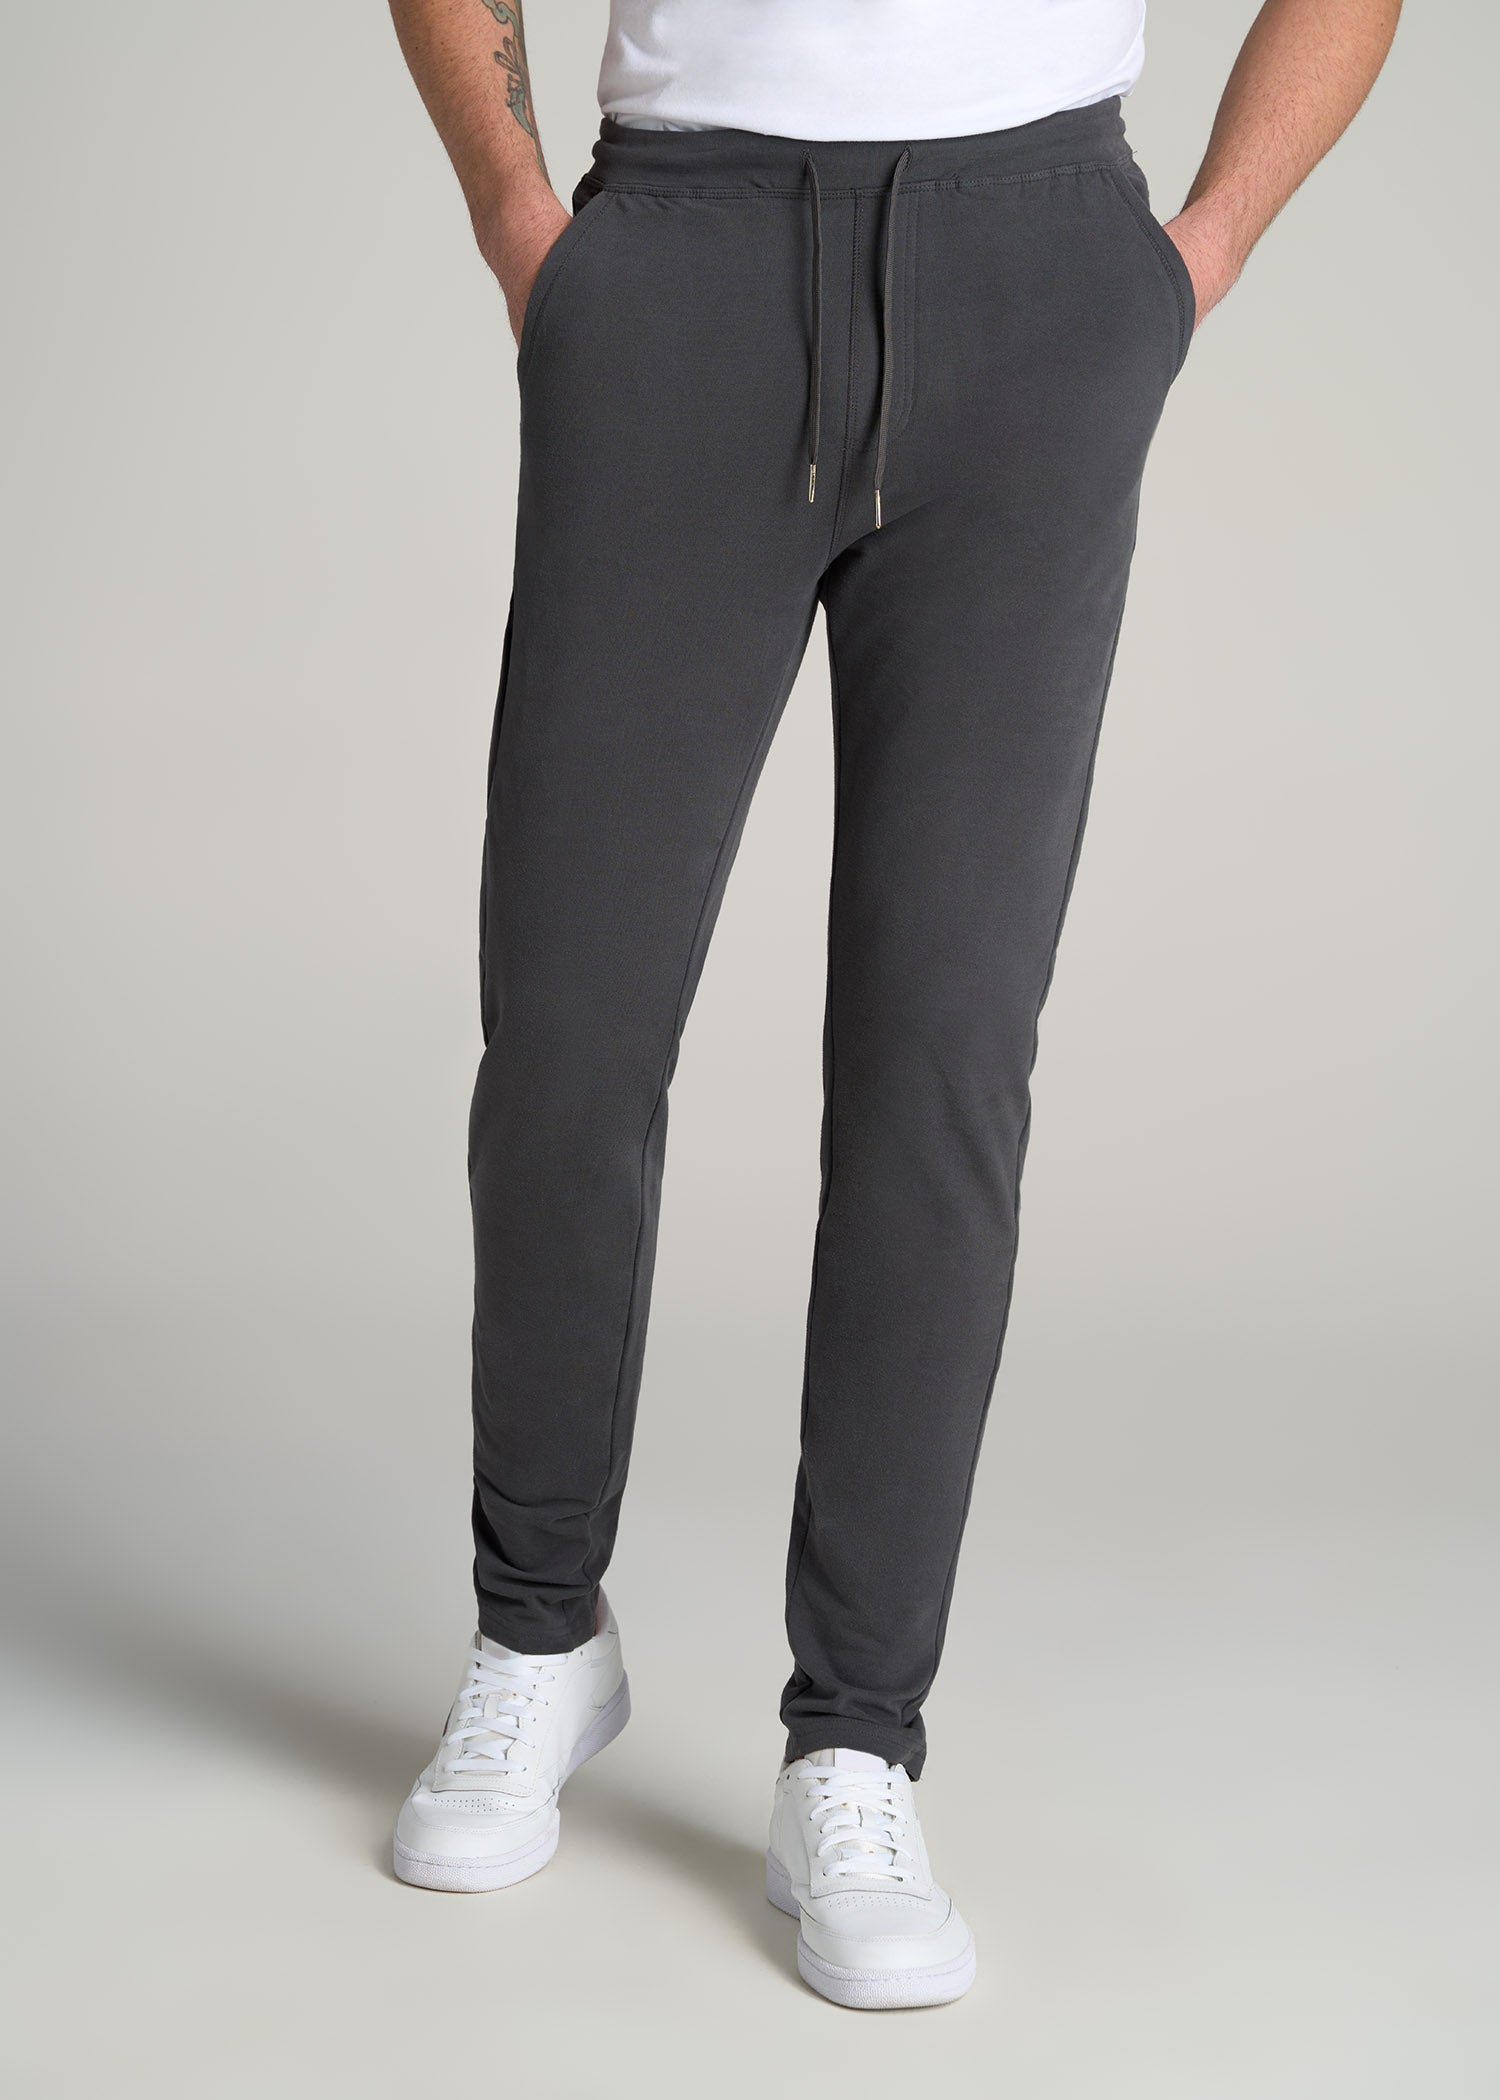    American-Tall-Men-Microsanded-French-Terry-Sweatpant-Iron-Grey-front